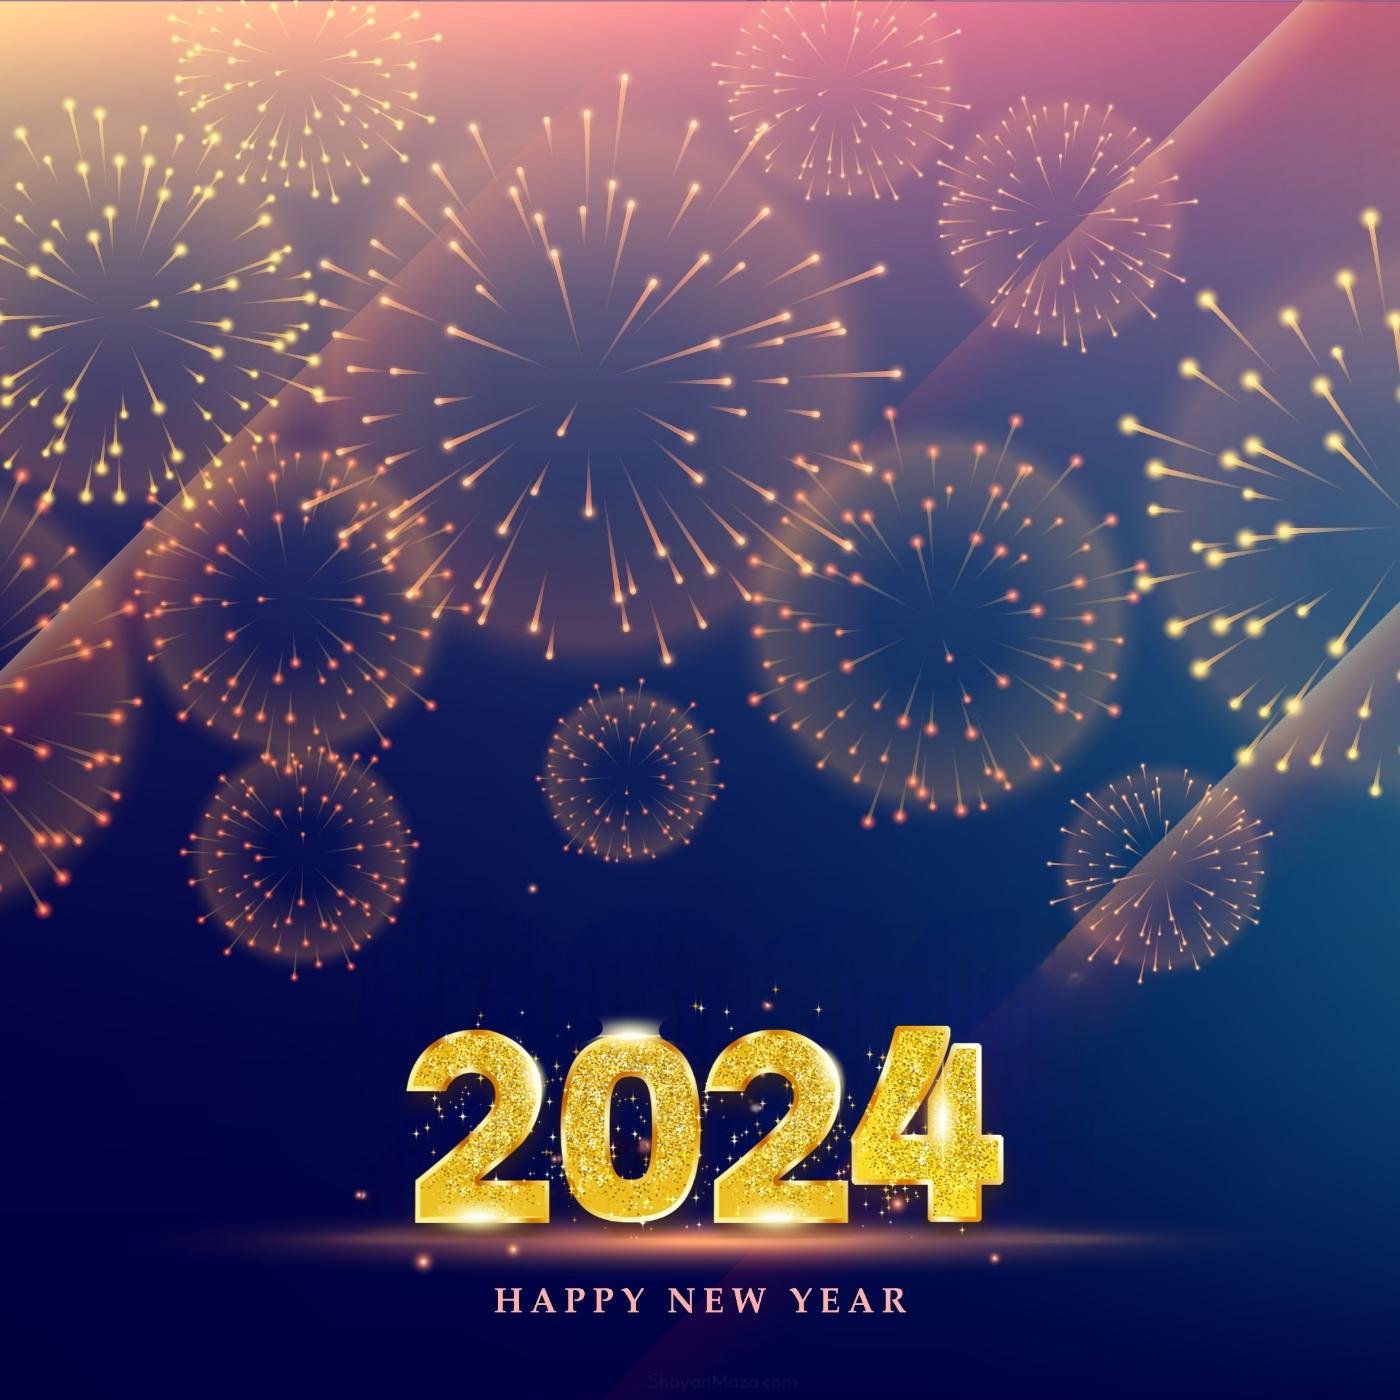 Happy New Year 2024 Free Images Download